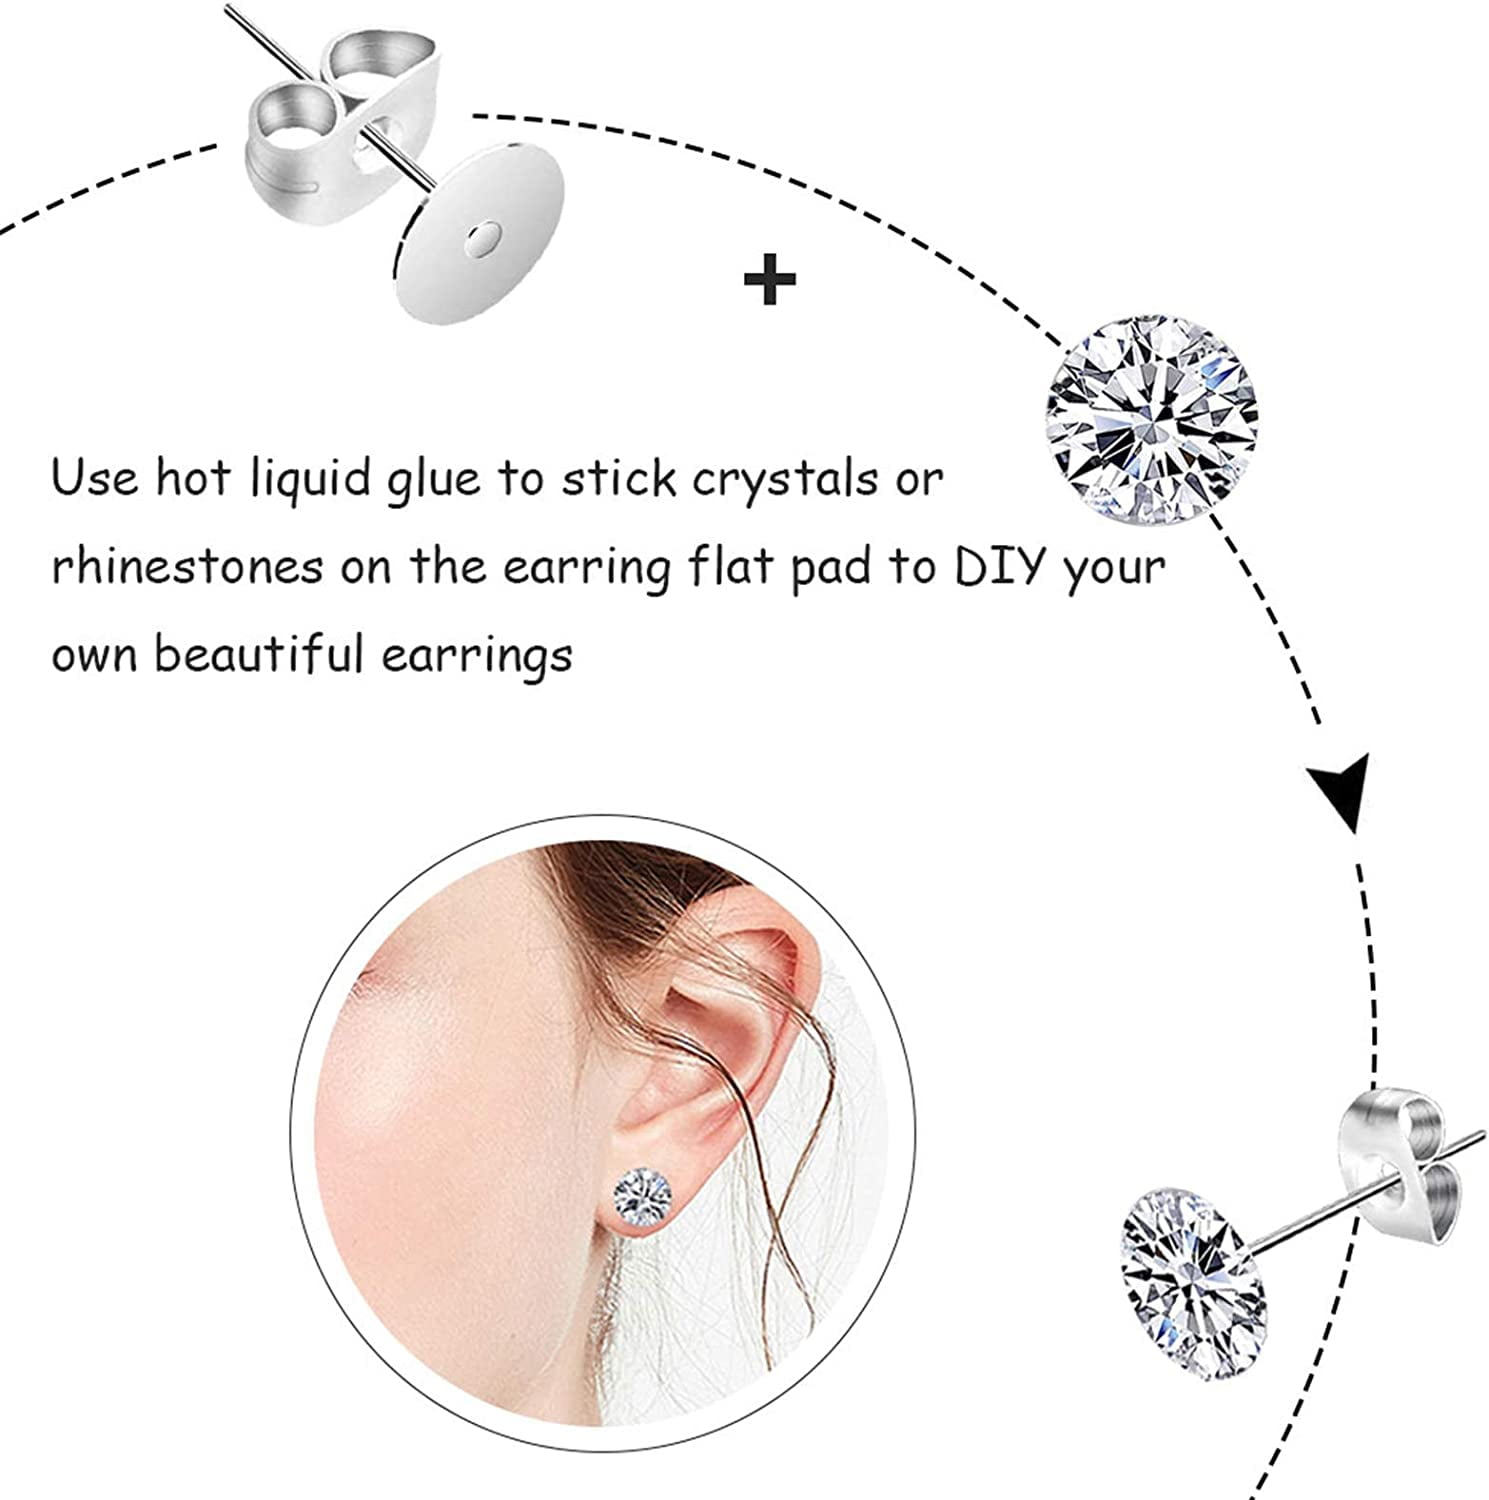 200pcs Nickel-Free Stainless Steel Earrings Posts Flat Pad, Earring Backs for Studs, Hypoallergenic Earring Studs with Butterfly and Rubber Bullet Ear